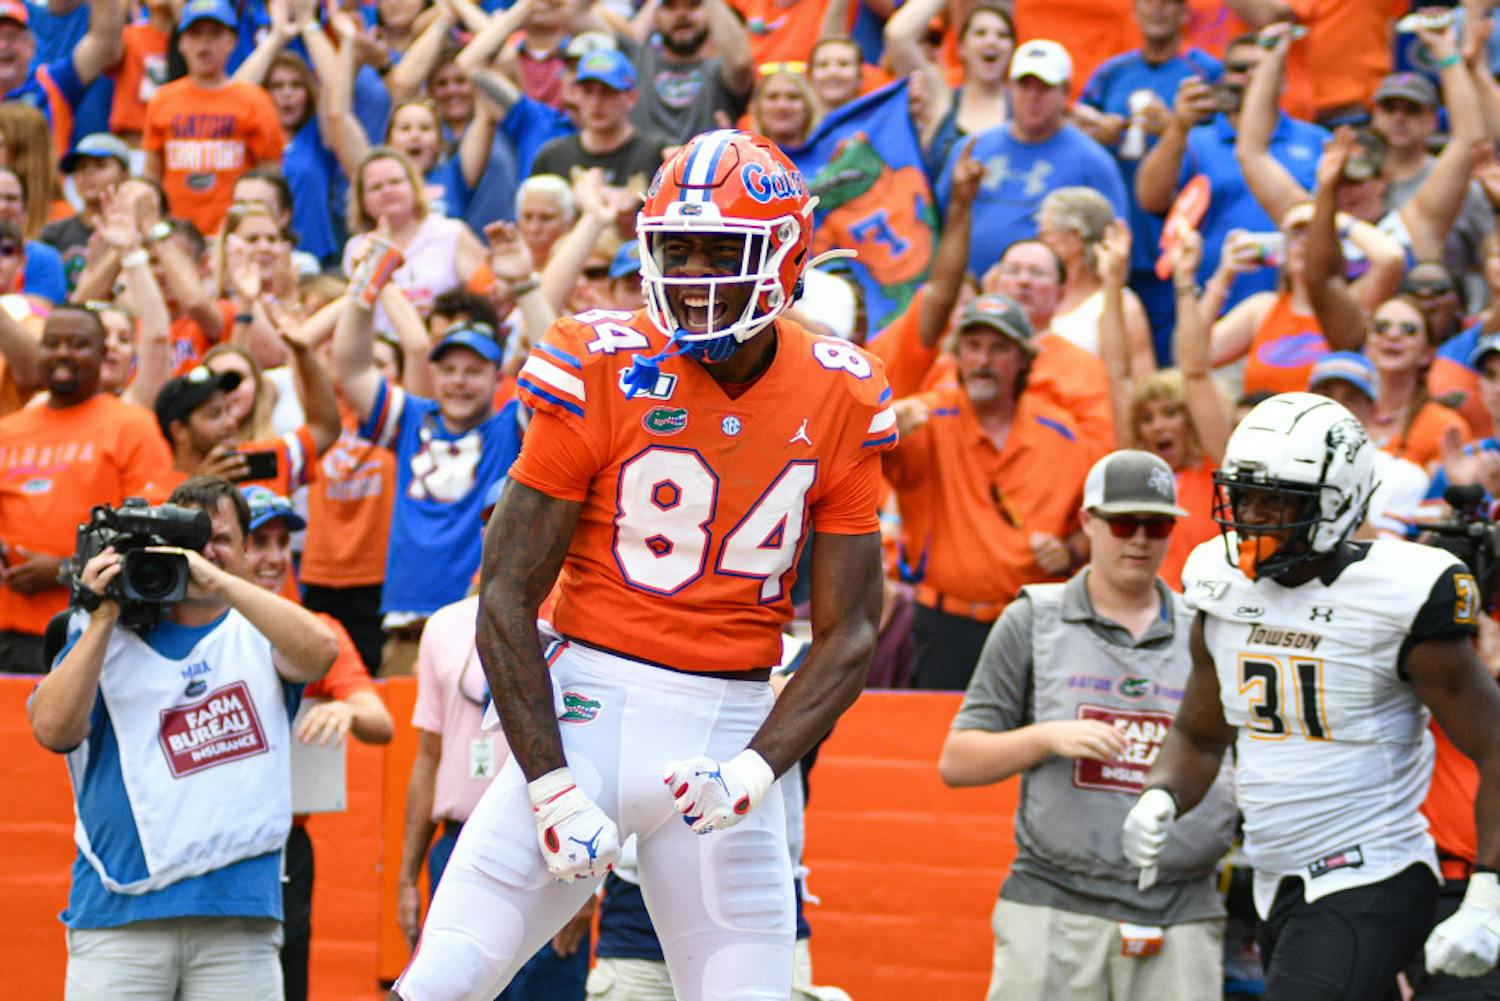 Tight end Kyle Pitts caught two touchdowns as UF defeated Towson 38-0.